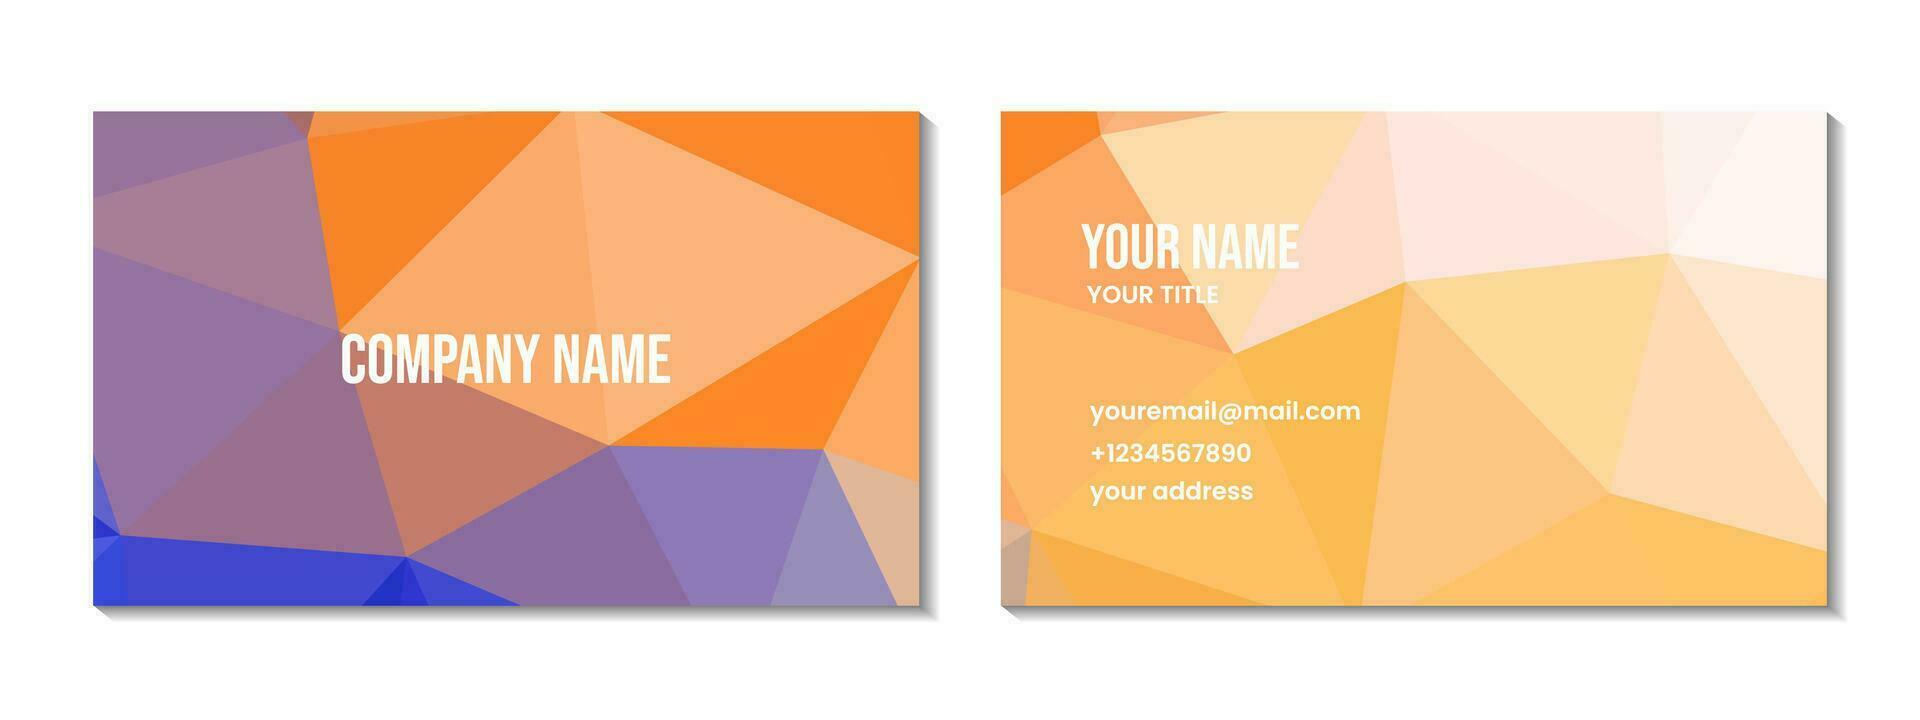 business card design. abstract blue orange colorful geometric background with triangles vector